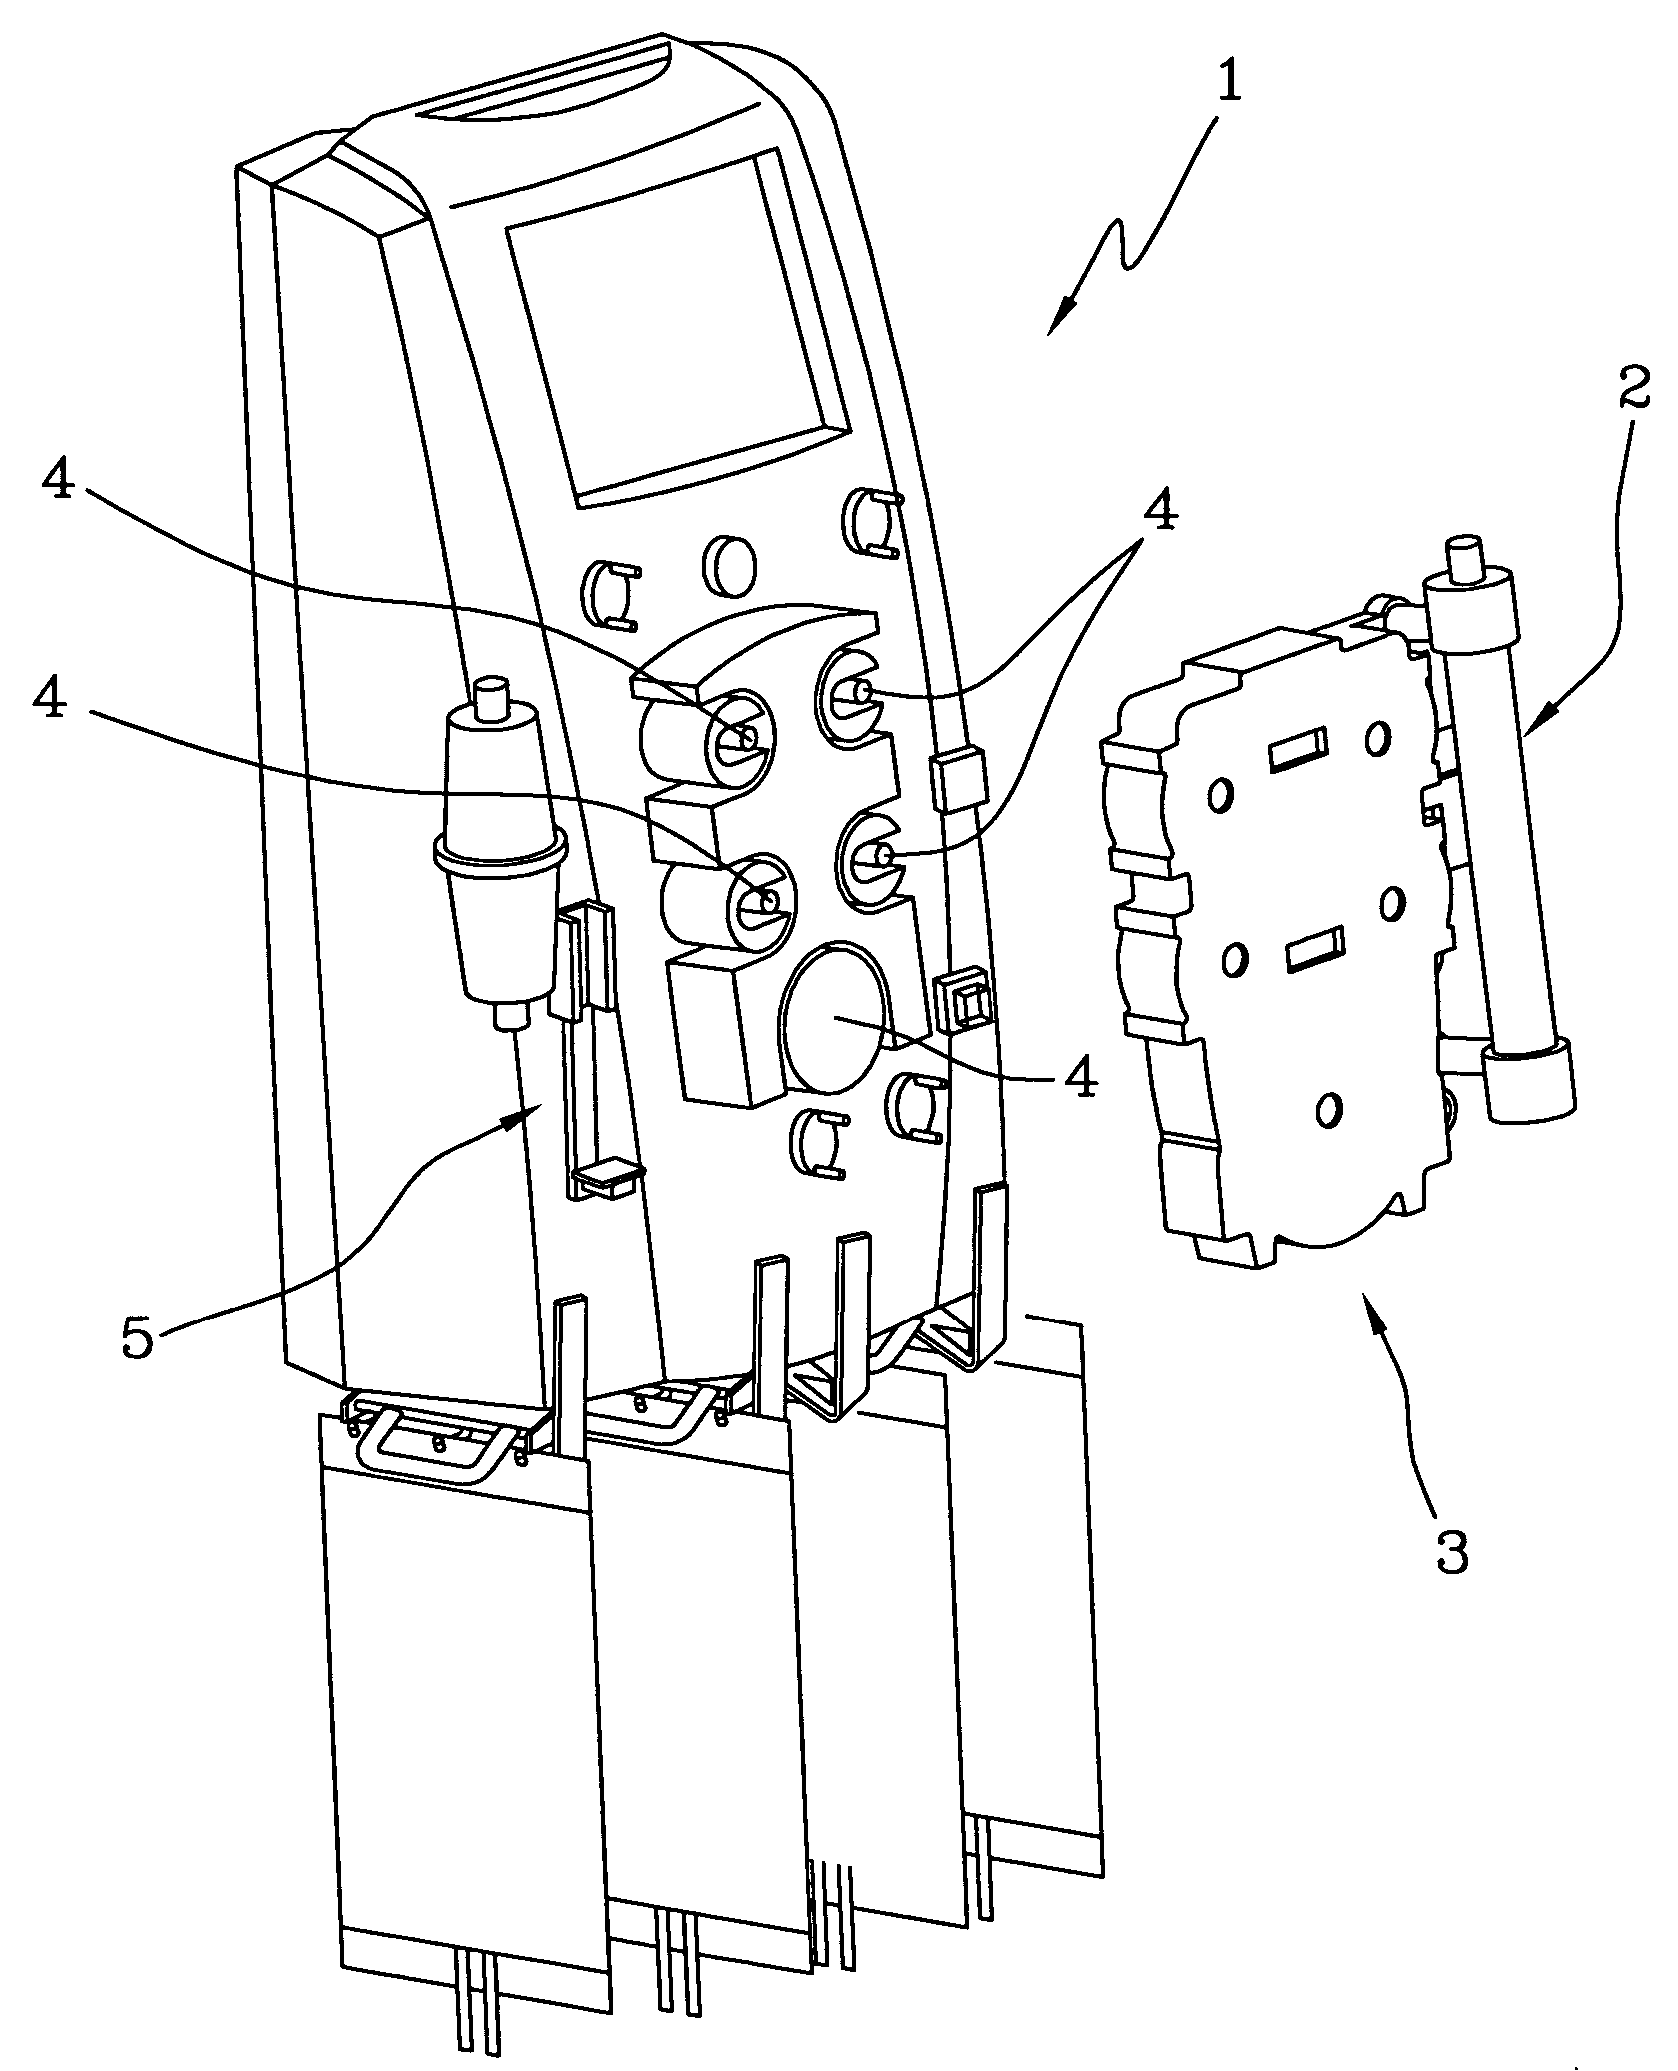 Infusion device for medical fluids